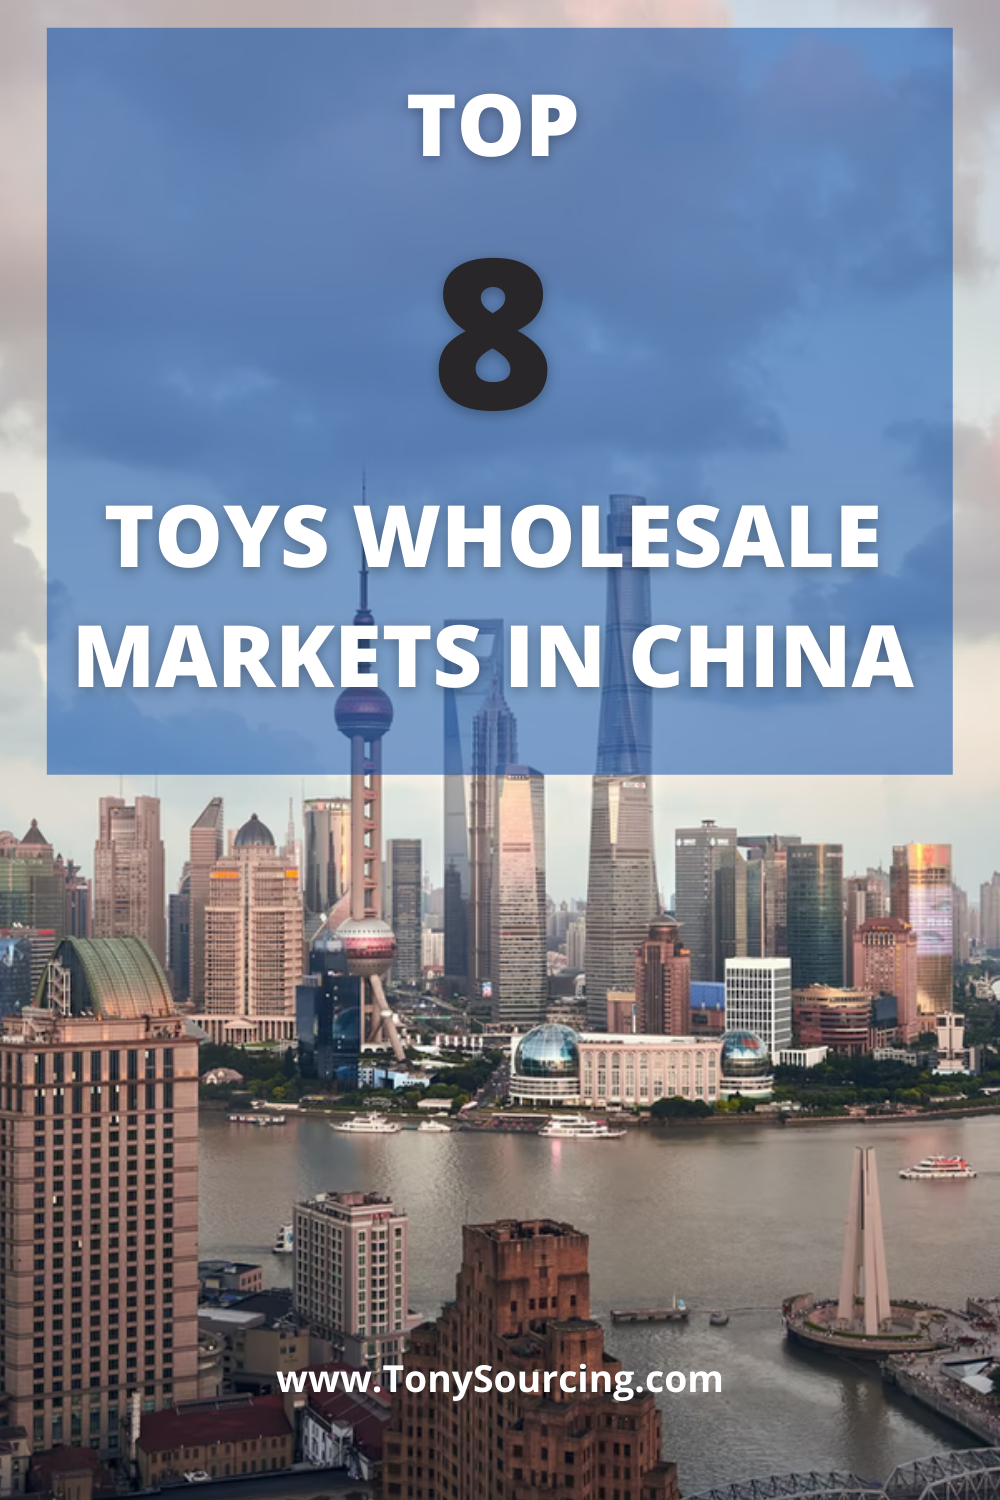 Top 8 Toys Wholesale Markets in China